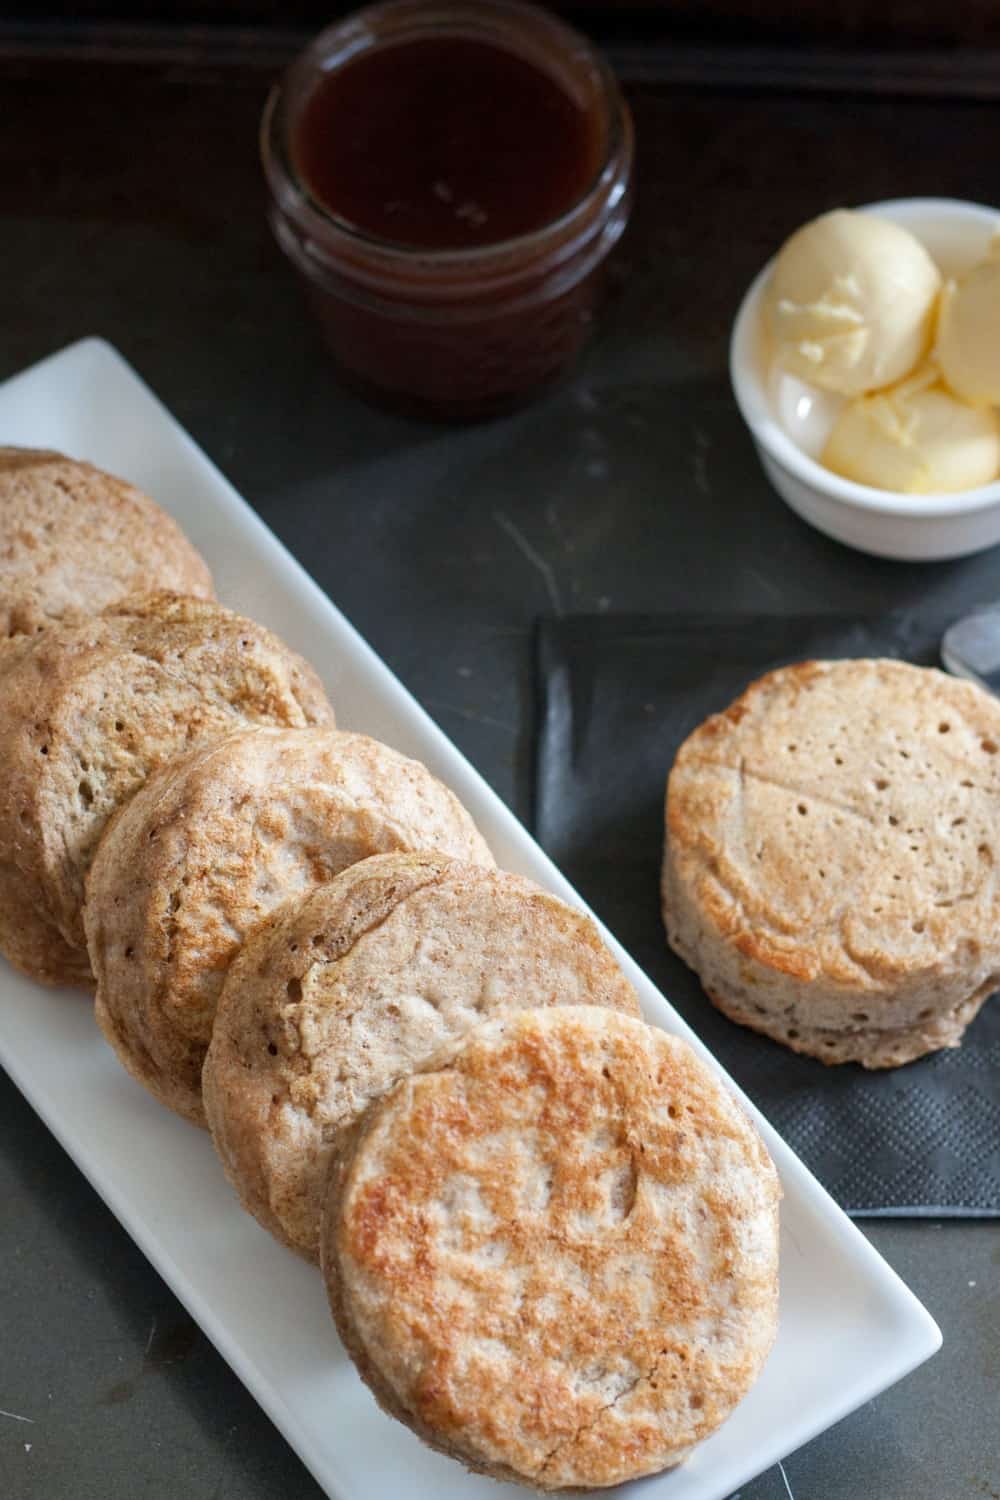 Whole wheat crumpets are a delicious bread you can make at home! Perfect for new bread bakers. * GoodieGodmother.com